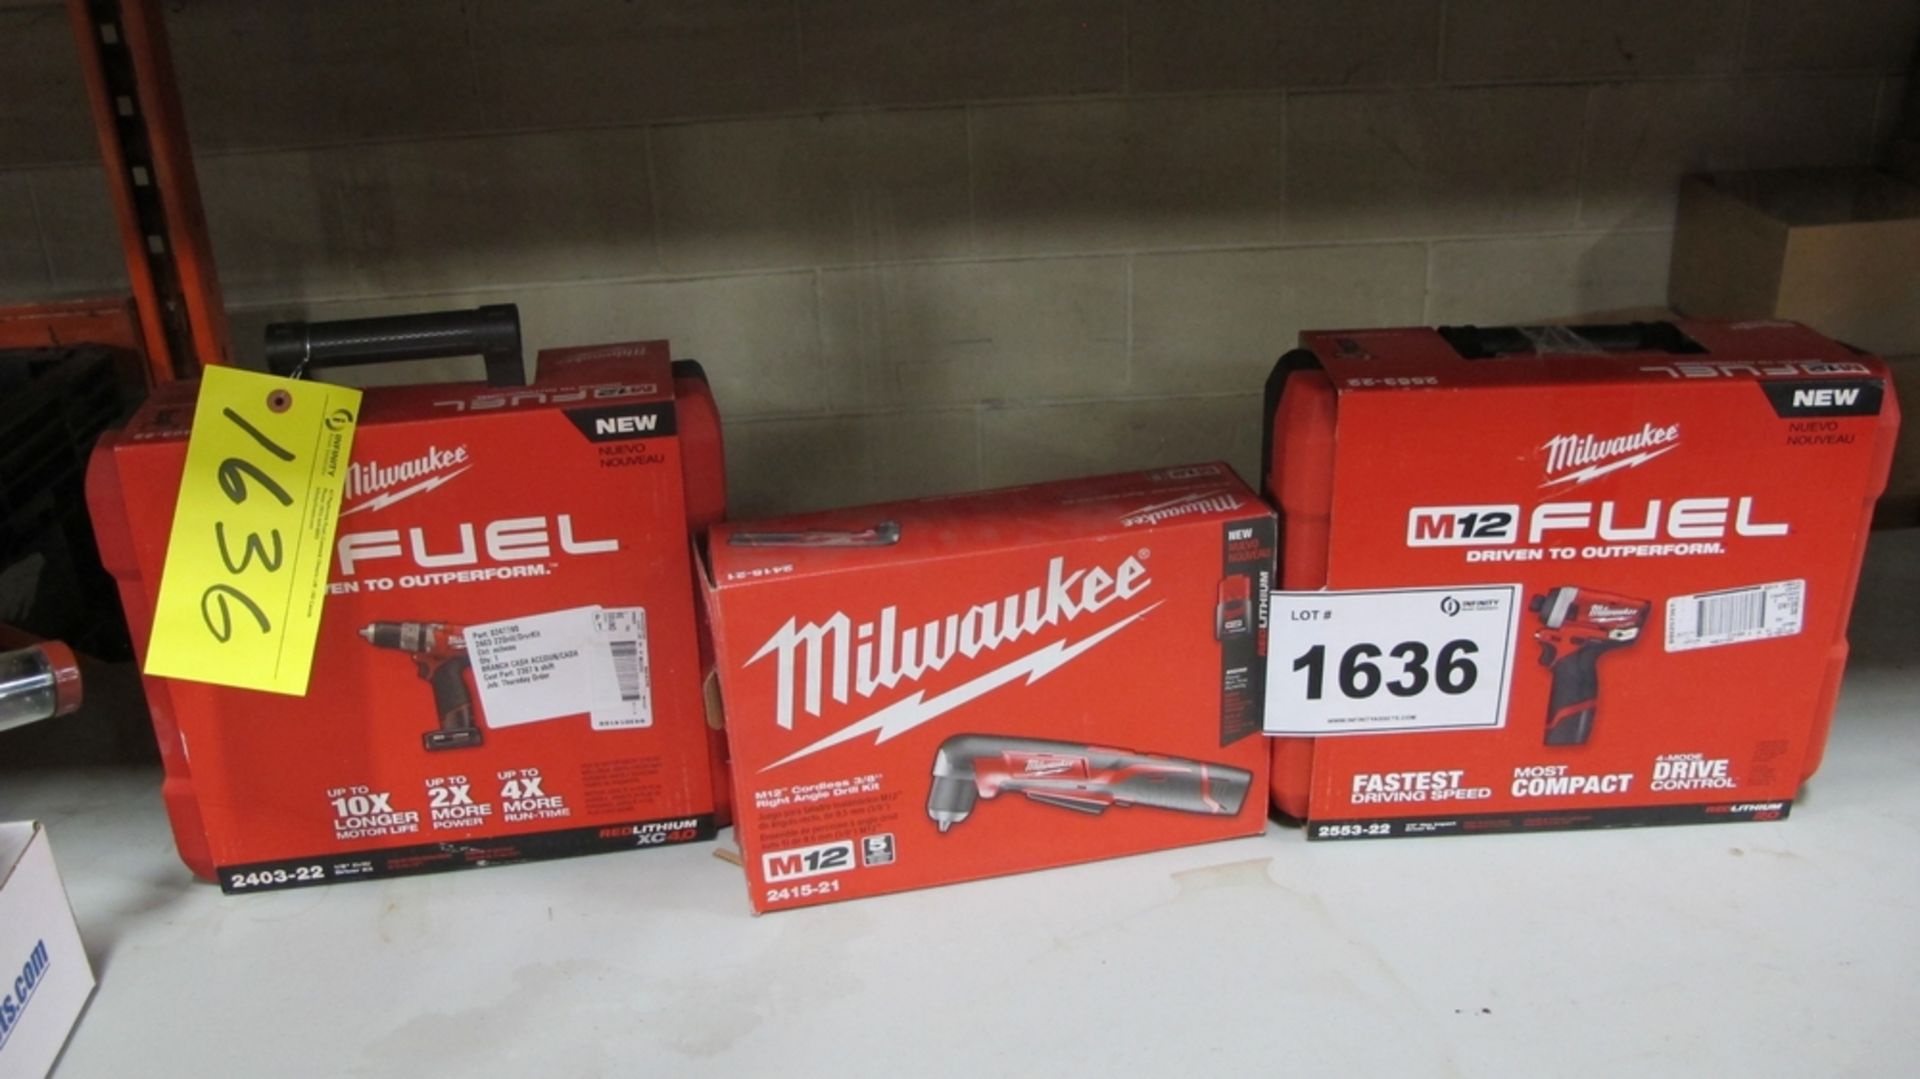 LOT OF MILWAUKEE M12 FUEL IMPACT WRENCH, RIGHT ANGLE DRILL AND DRIVER (100 SHIRLEY AVE KITCHENER)